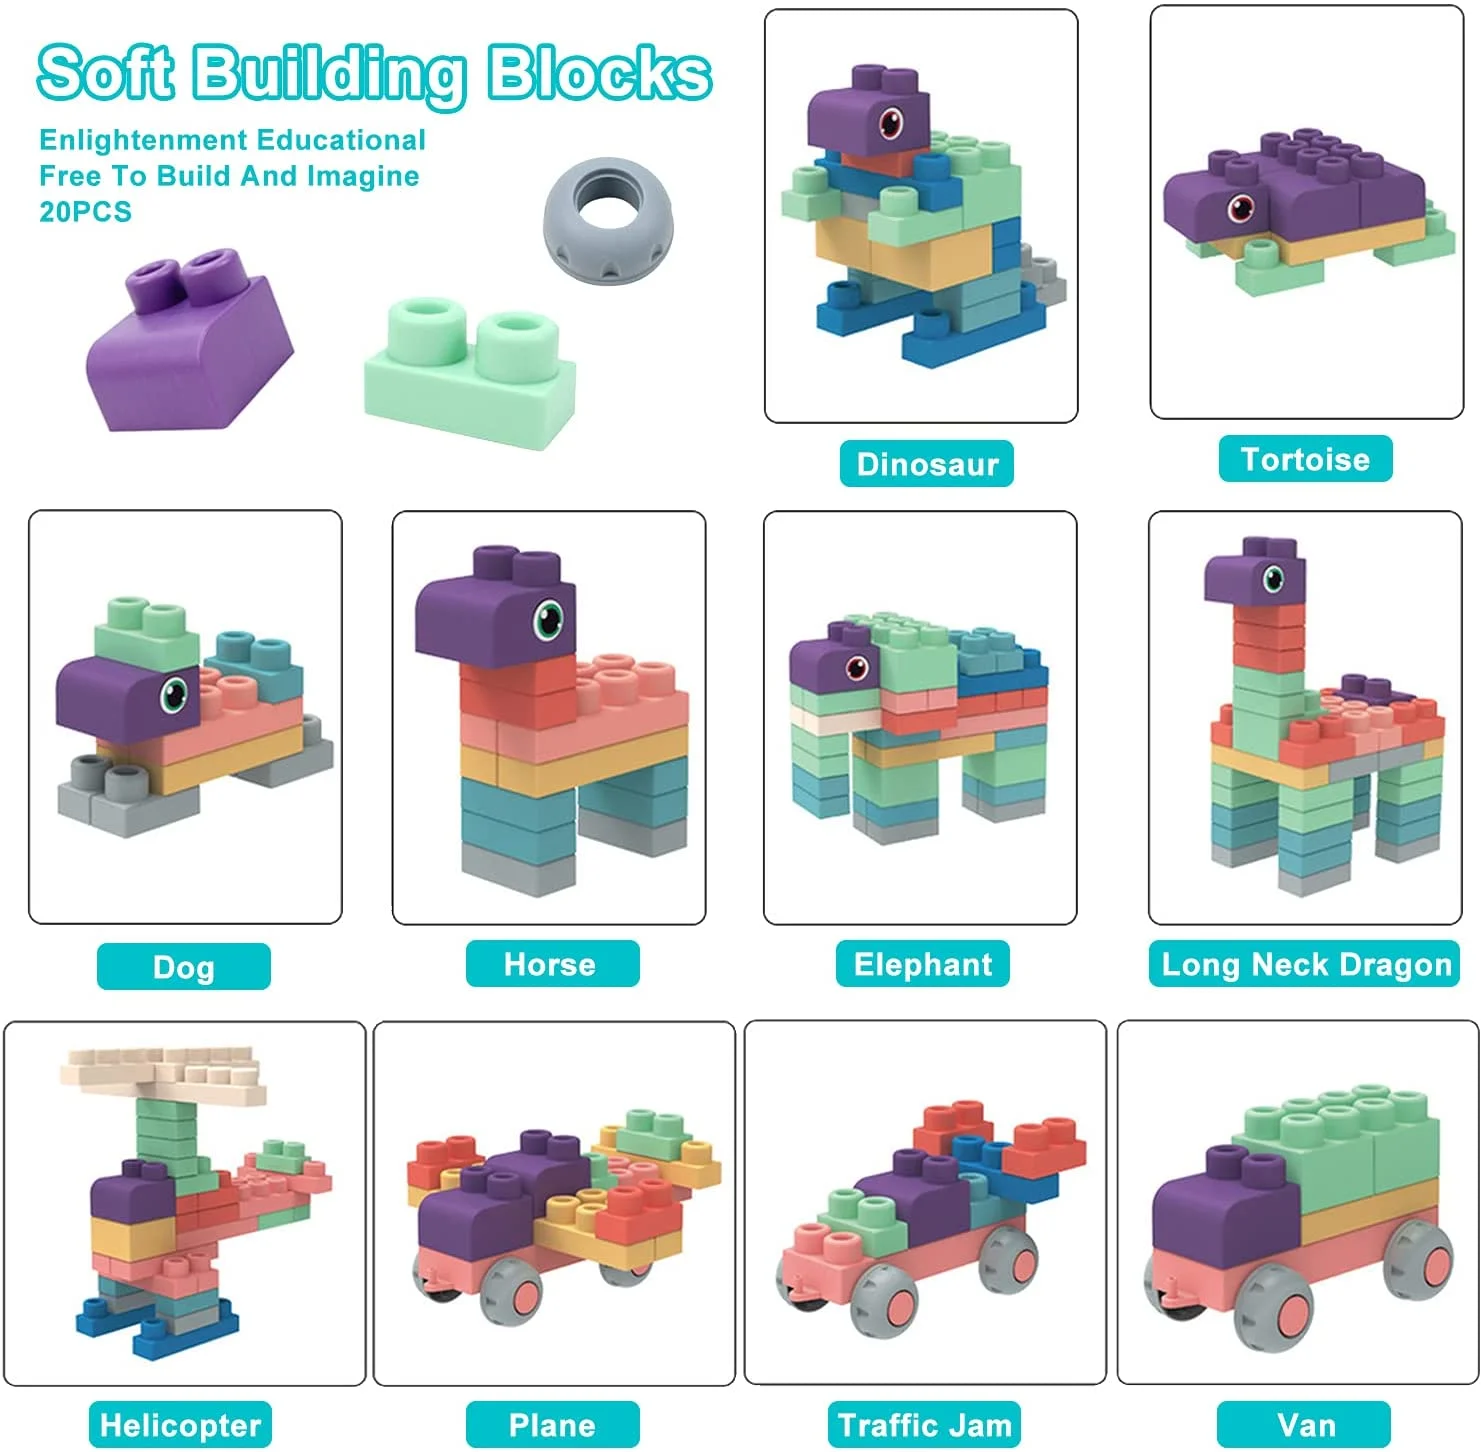 Best welcome fashion silicon soft rubber building block for baby toys